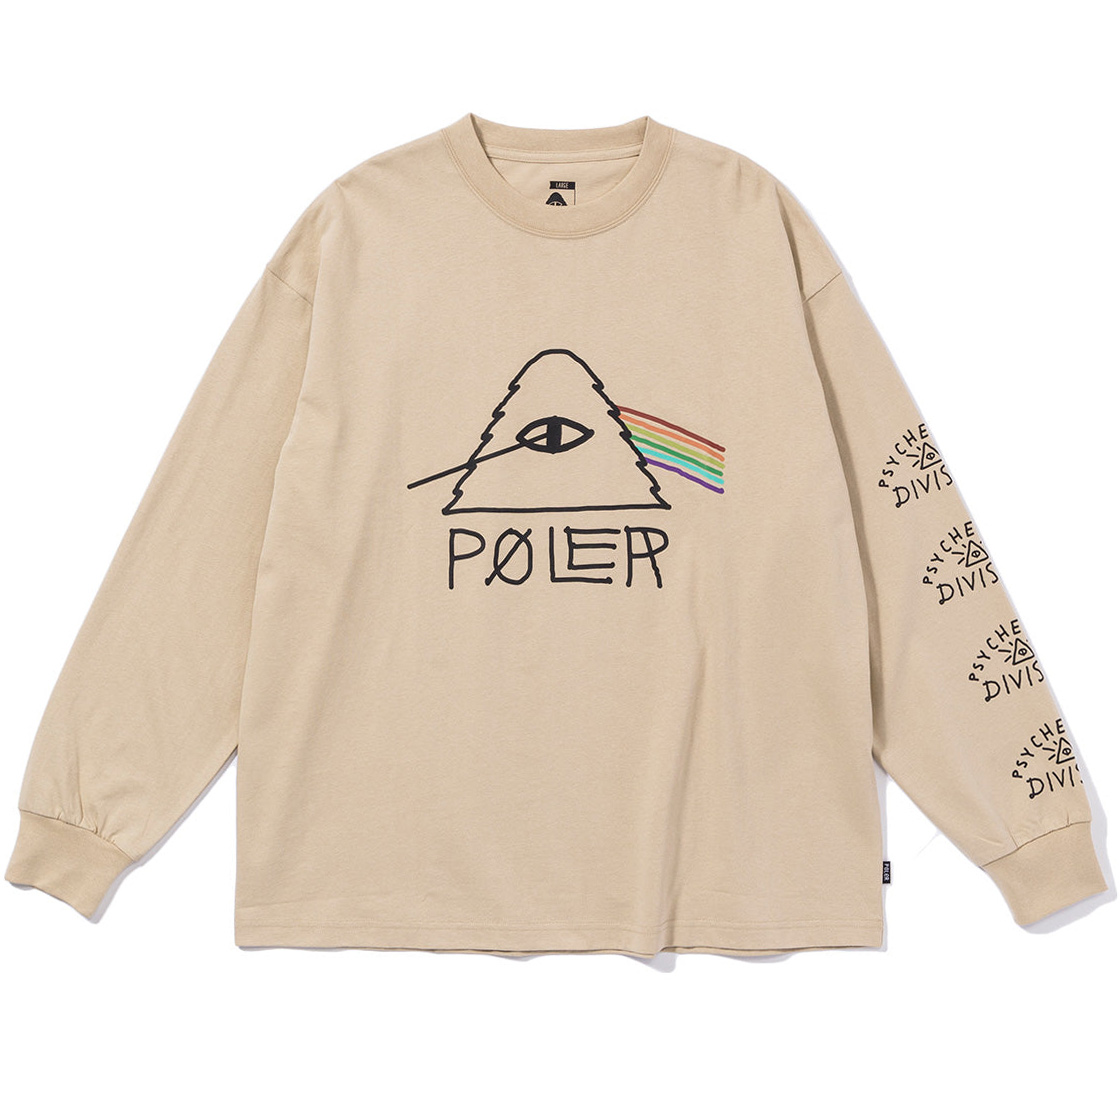 POLeR PSYCHEDELIC RELAX FIT L/S TEE 長袖 ポーラー Tシャツ ロ...